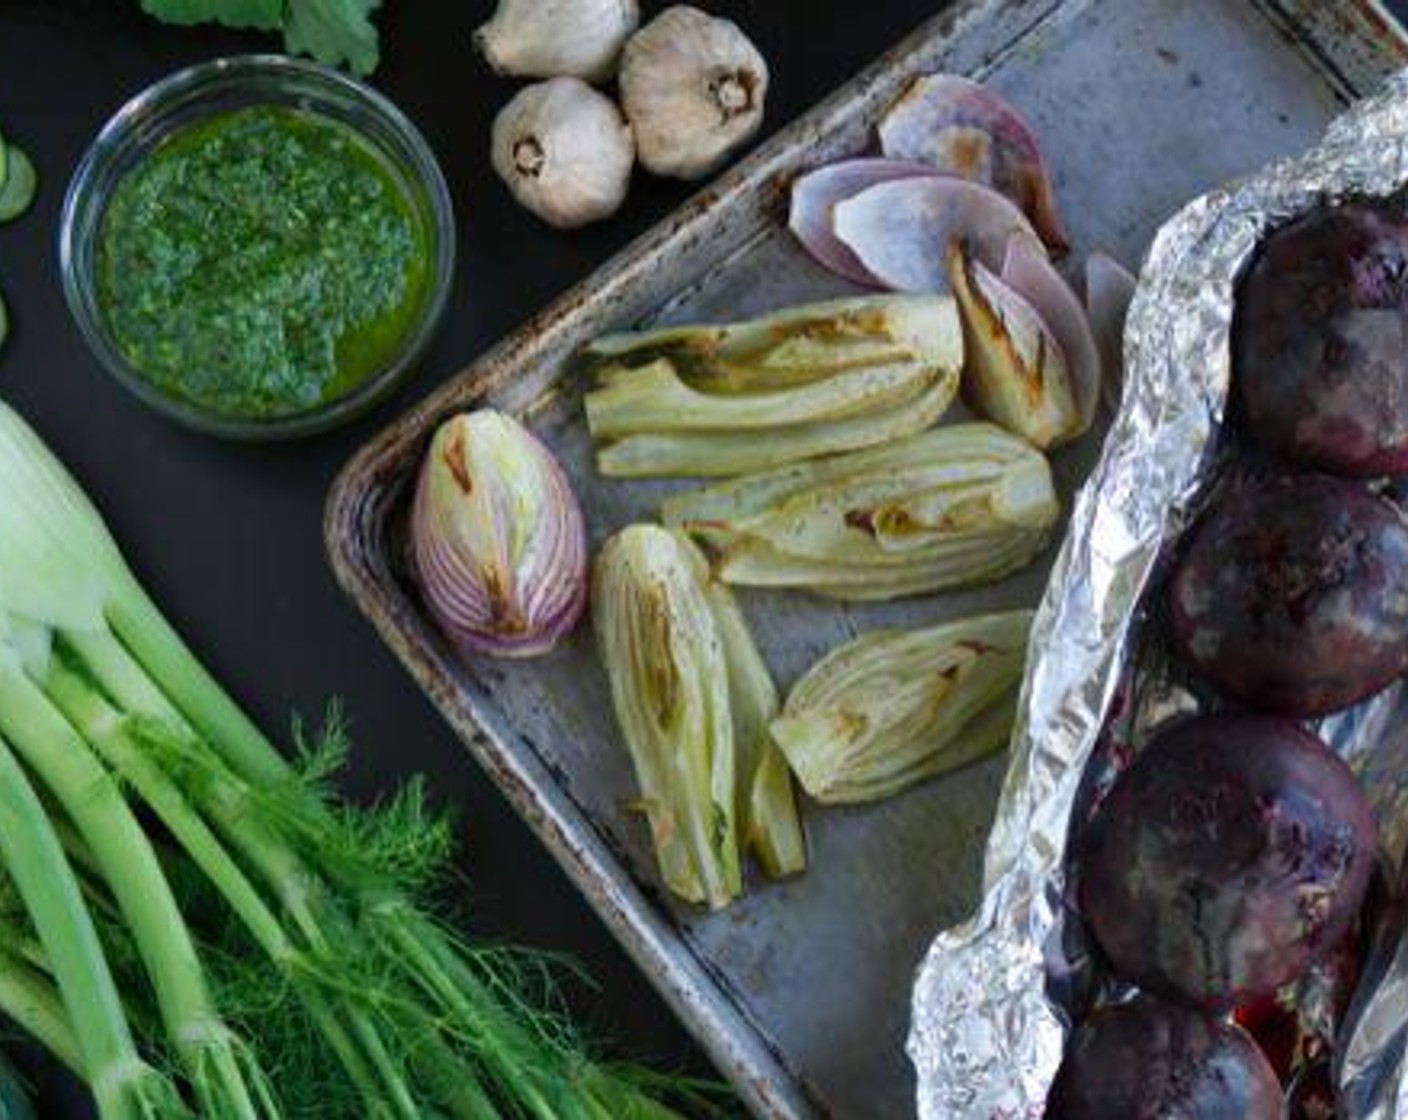 step 3 With your beets in the oven, add your Fennel Bulbs (2), and Red Onion (1) to a sheet pan or baking dish. Drizzle with Olive Oil (to taste) and season with Salt (to taste) and Ground Black Pepper (to taste). Add them to the oven. Cook 20-25 minutes. Allow to cool.